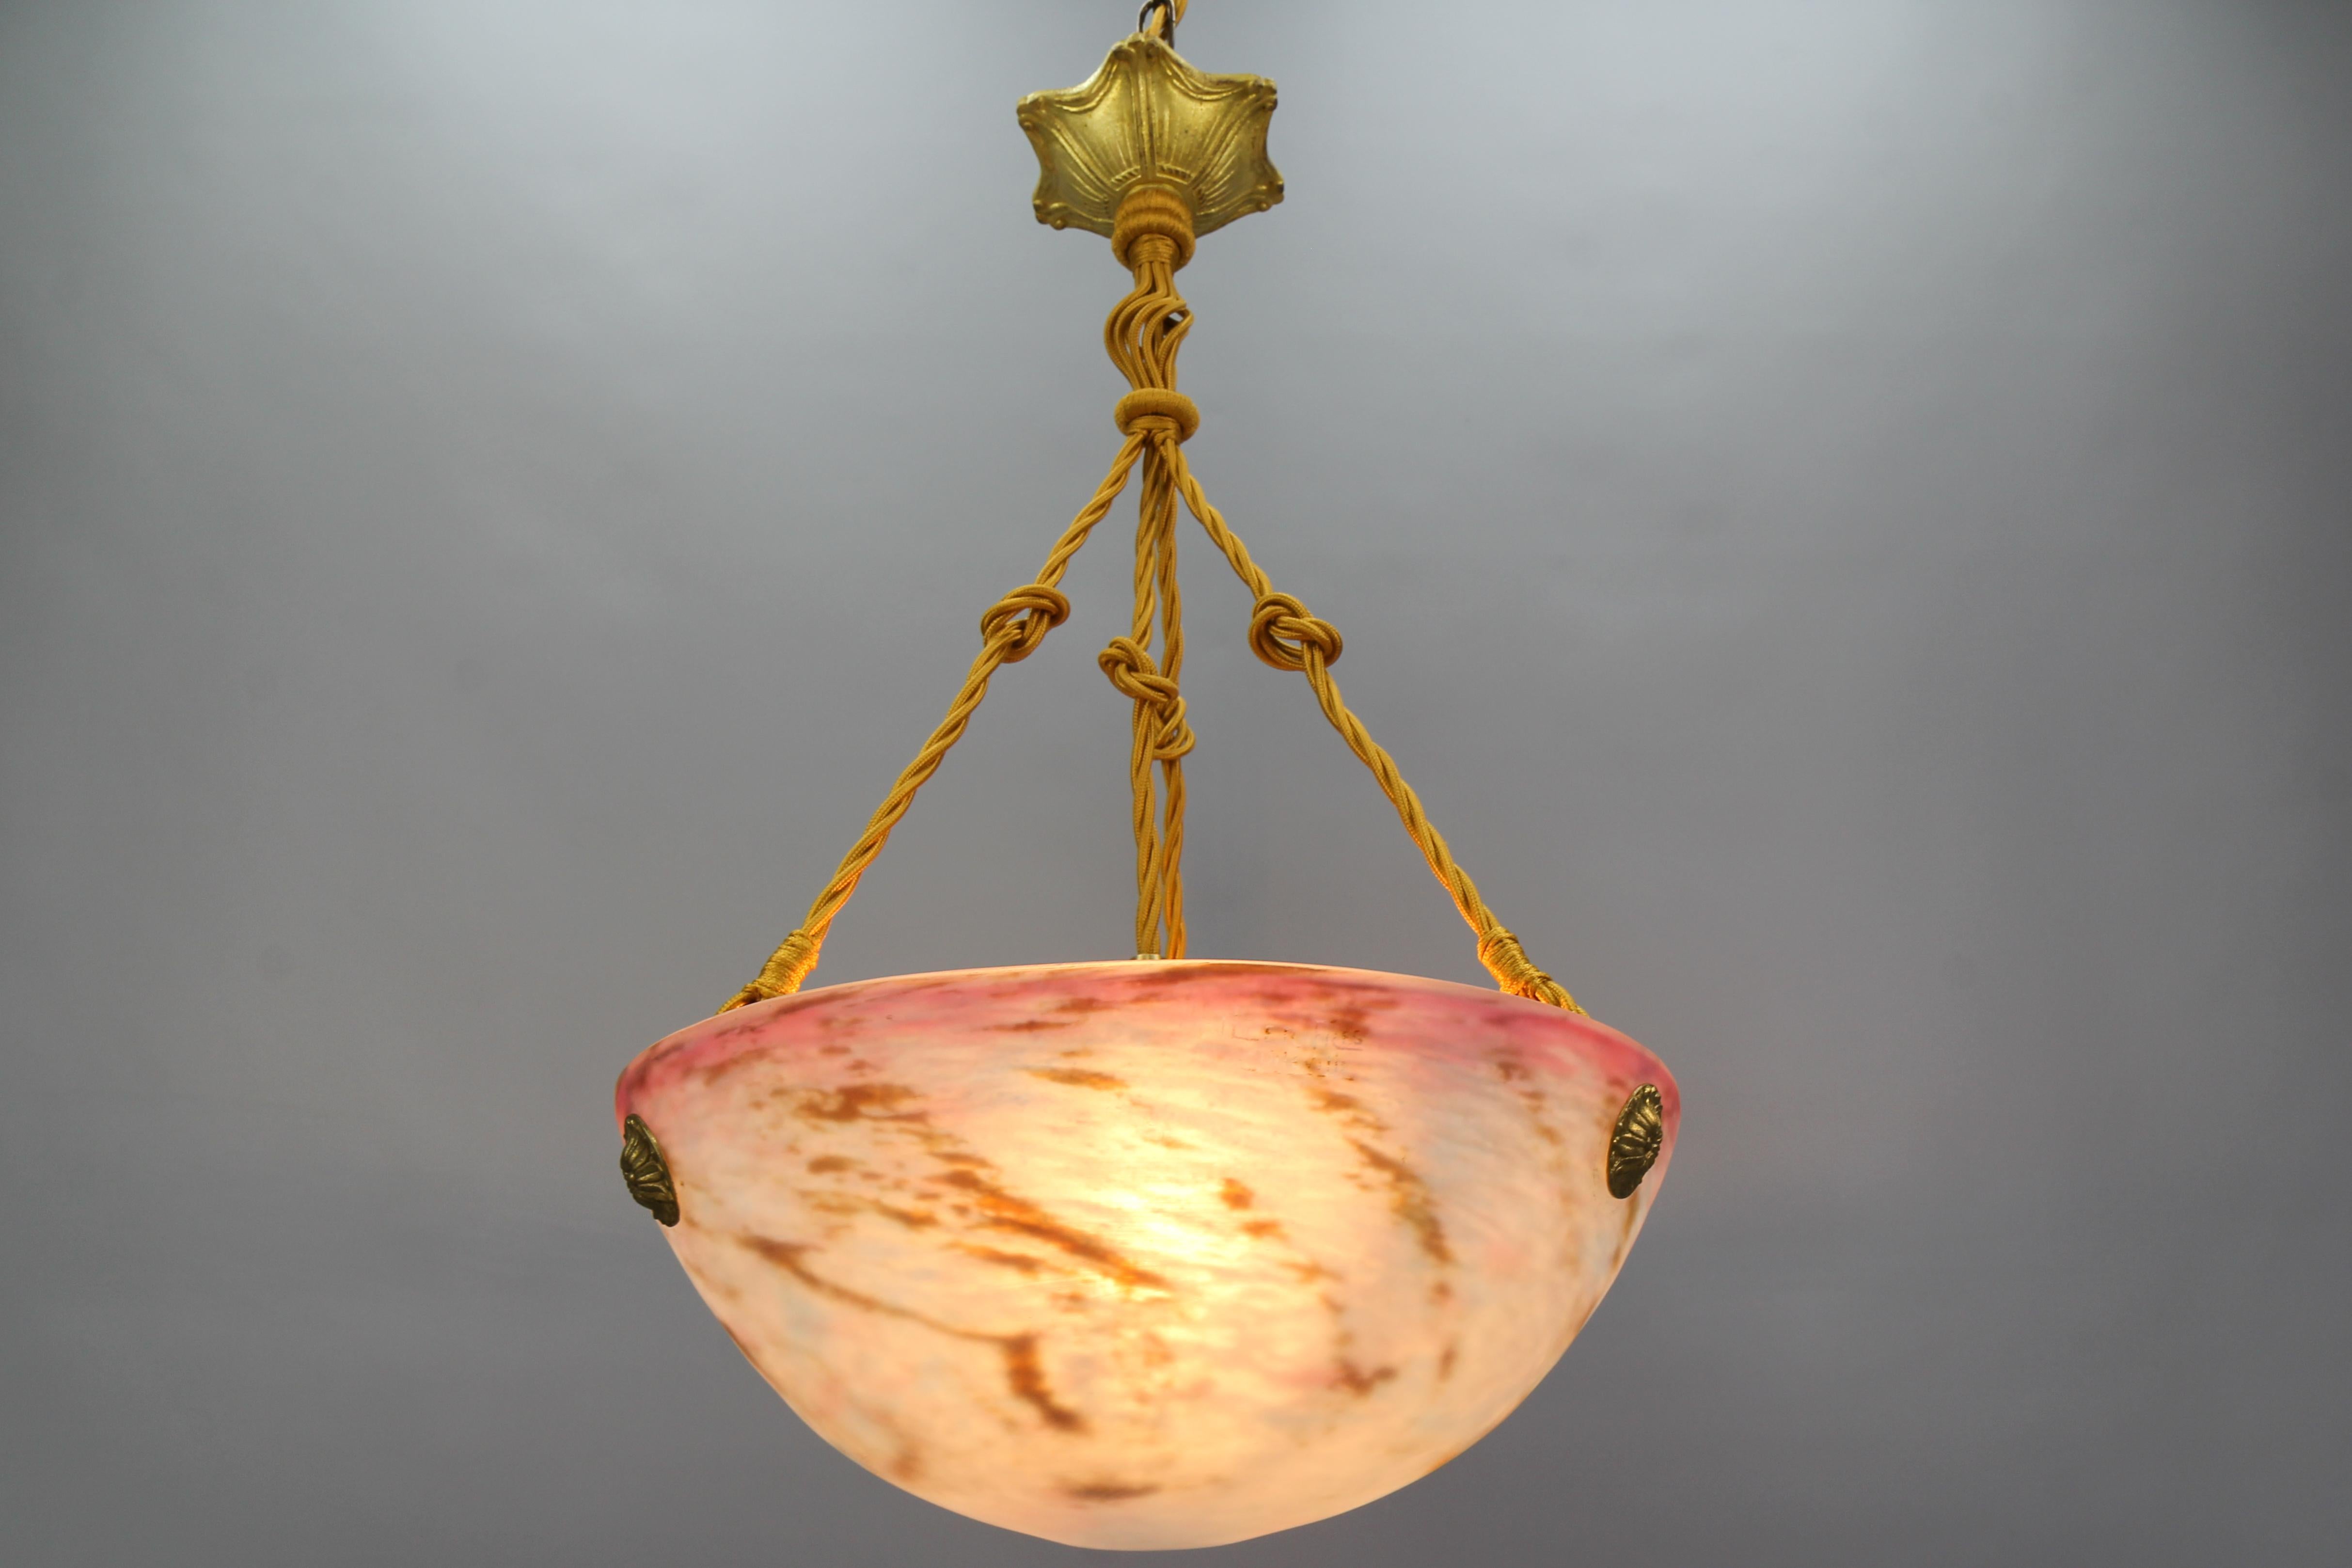 French Art Nouveau bronze and Pâte de Verre glass pendant light fixture by Muller Frères Luneville from circa the 1920s.
This delightful French Art Nouveau period pendant light features a white color 'Pâte de Verre' glass bowl with purple, brown,